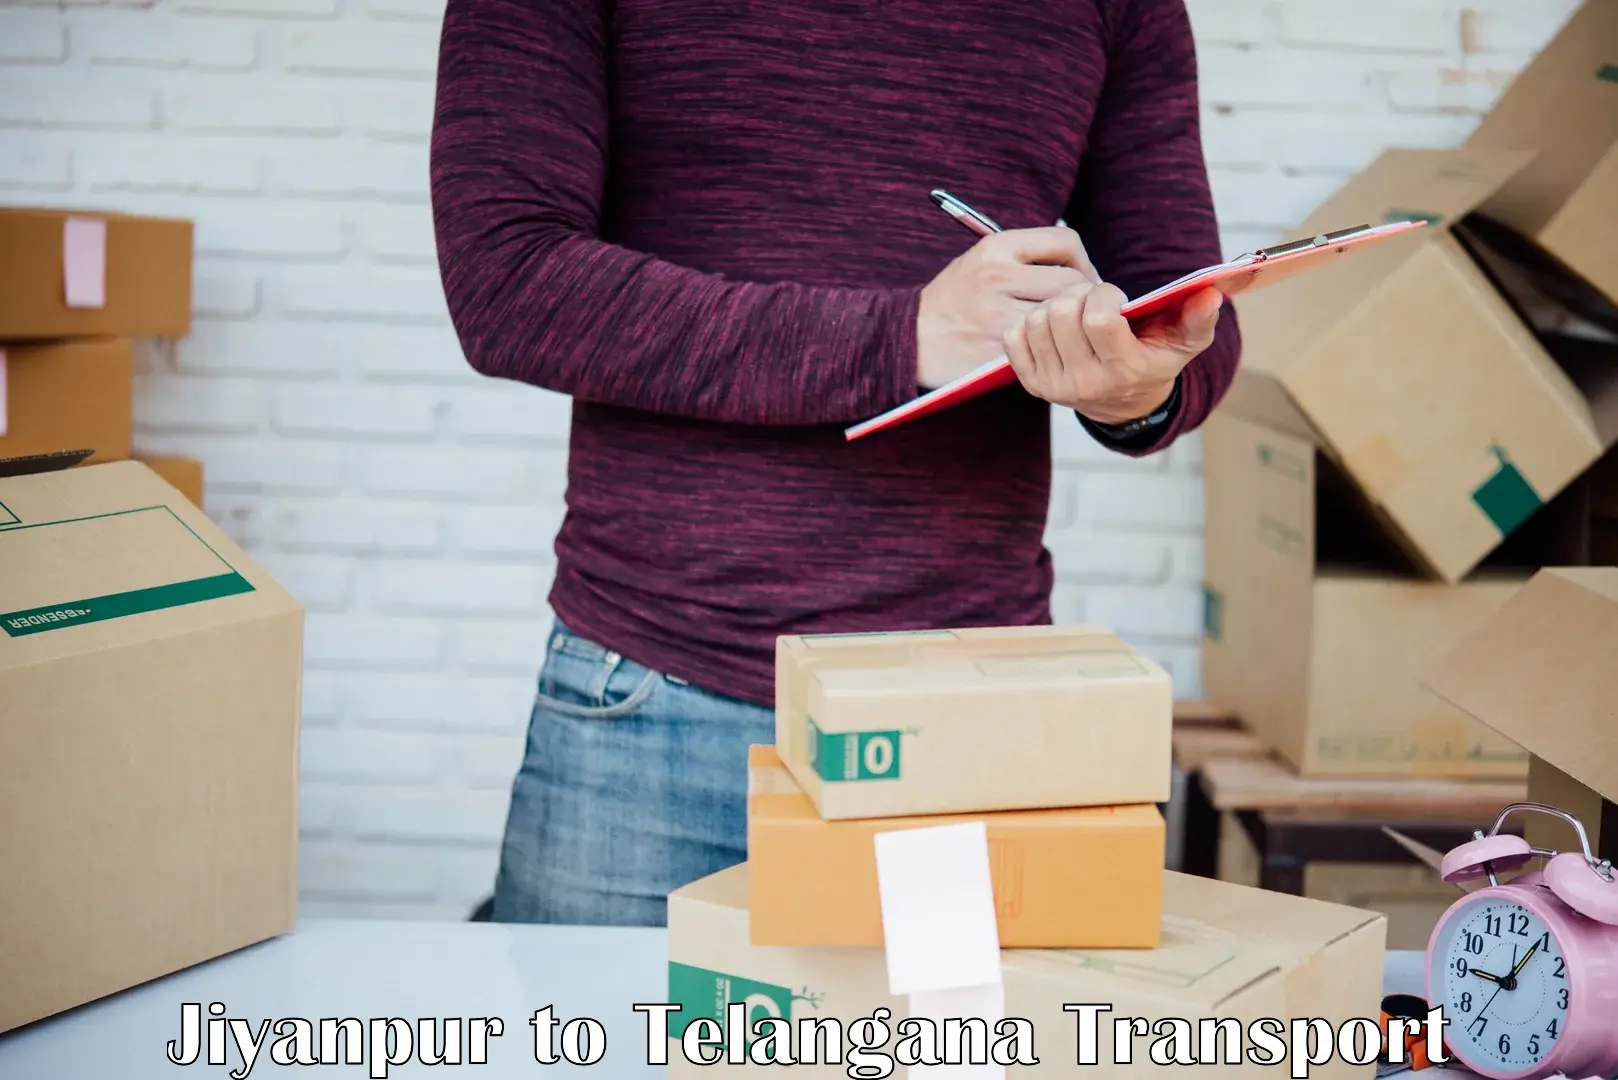 Air freight transport services Jiyanpur to Osmania University Hyderabad